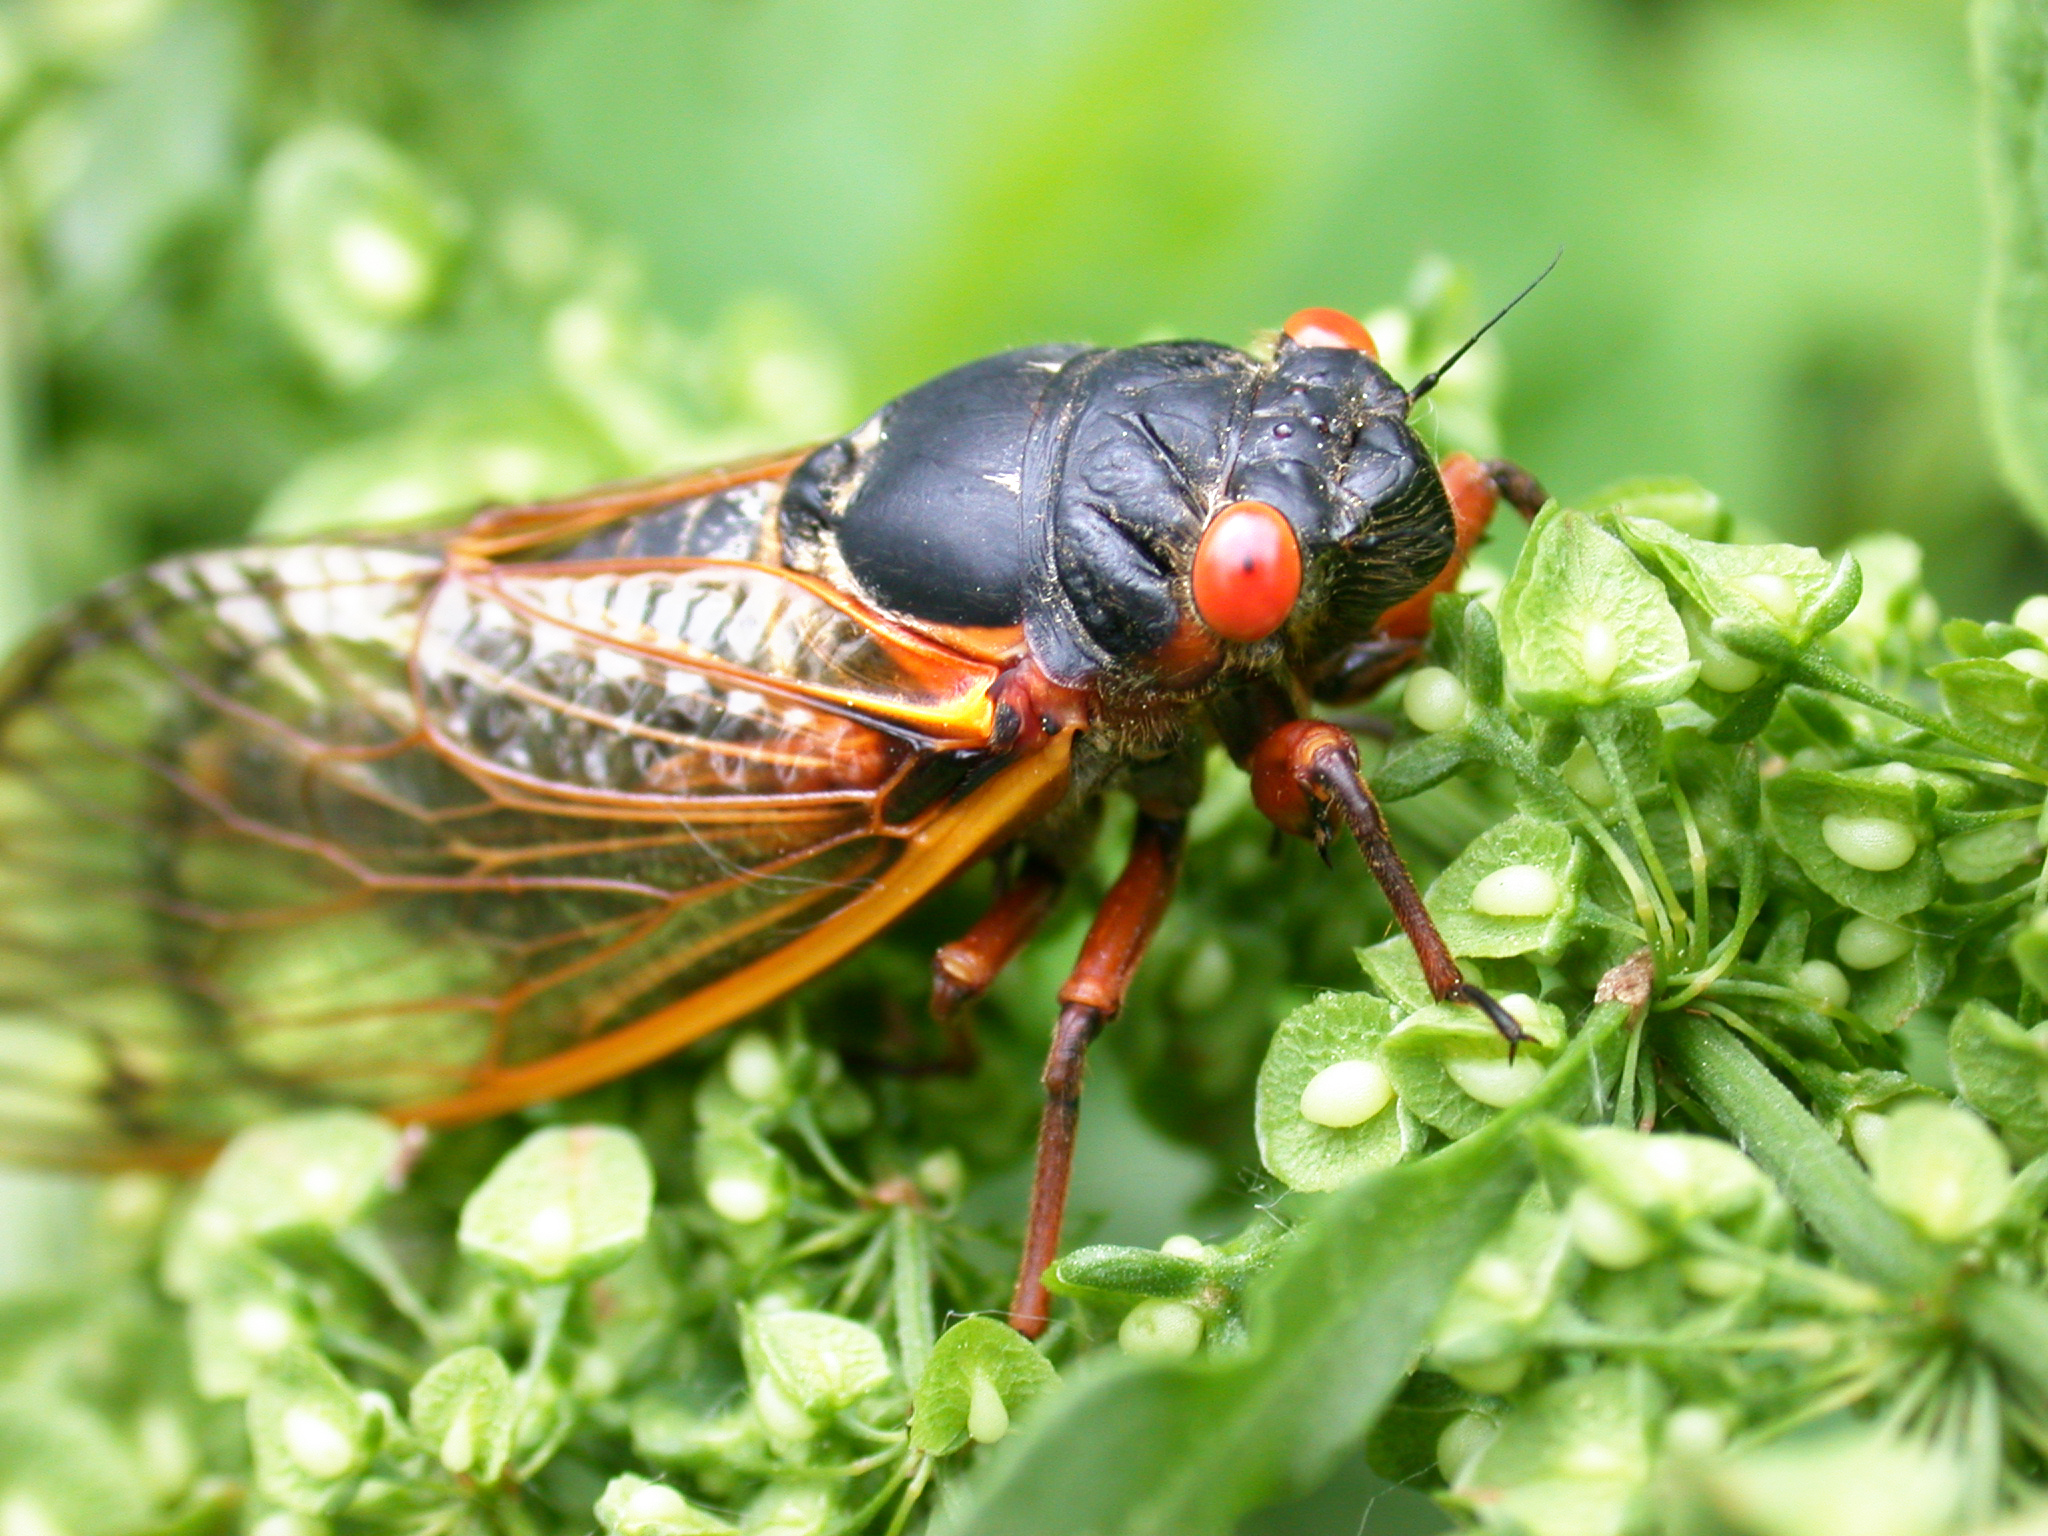 State of the Environment: Hordes of cicadas will have scientific benefits, expert says